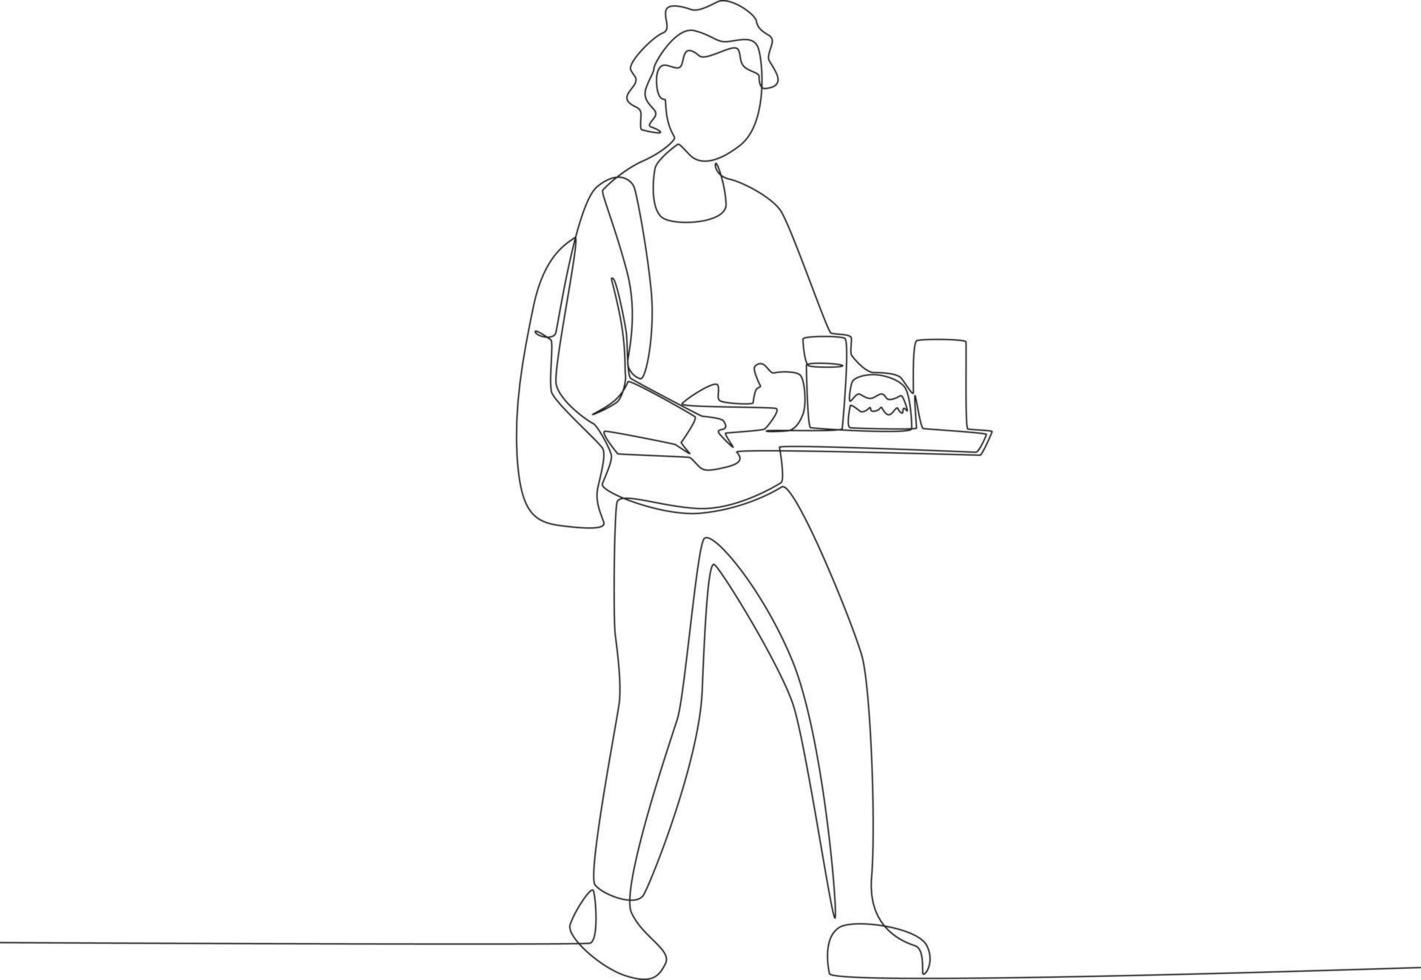 Curly-haired boy carrying a bag and a tray of food one line drawing vector